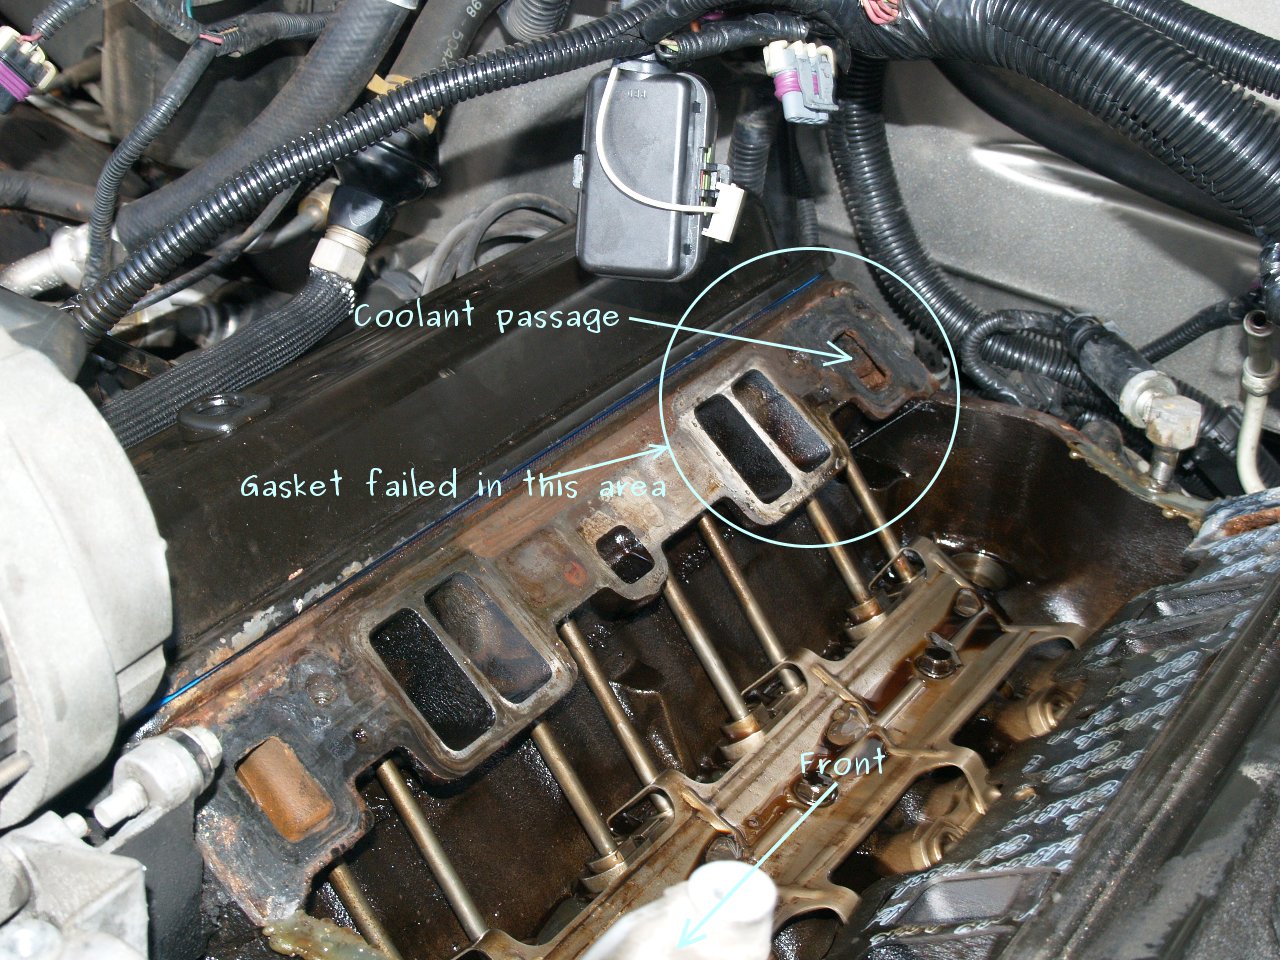 See P0A07 in engine